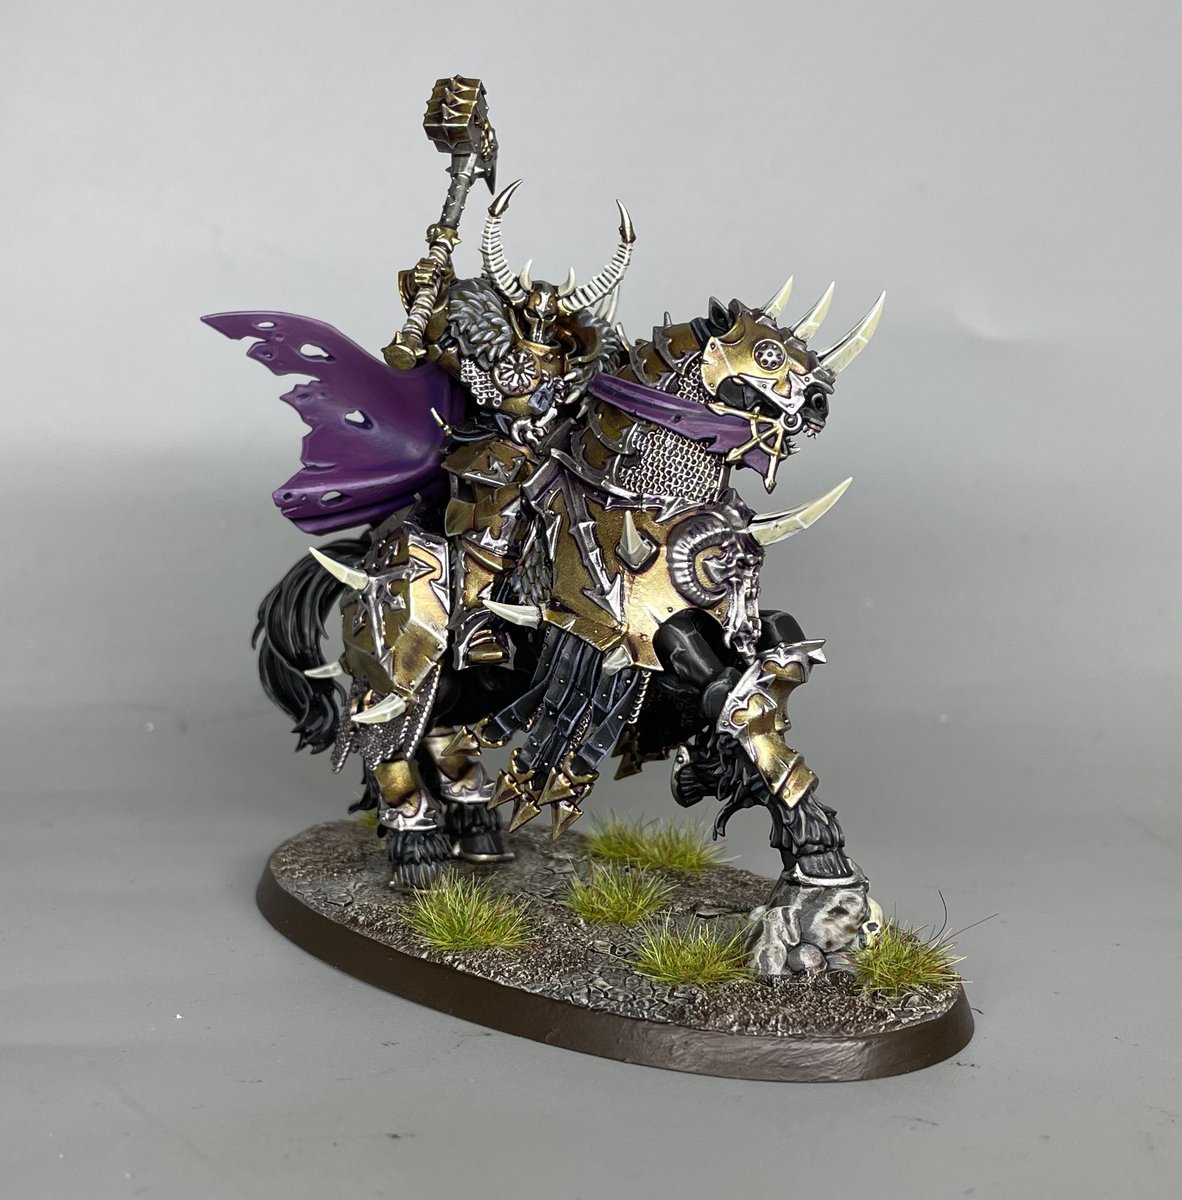 Managed to get this guy done, Chaos Lord on Demonic mount, takes my Slaves to Darkness army to 1000 points #chaos #slavestodarkness #warhammer #ageofsigmar #warriorsofchaos #paintingwarhammer